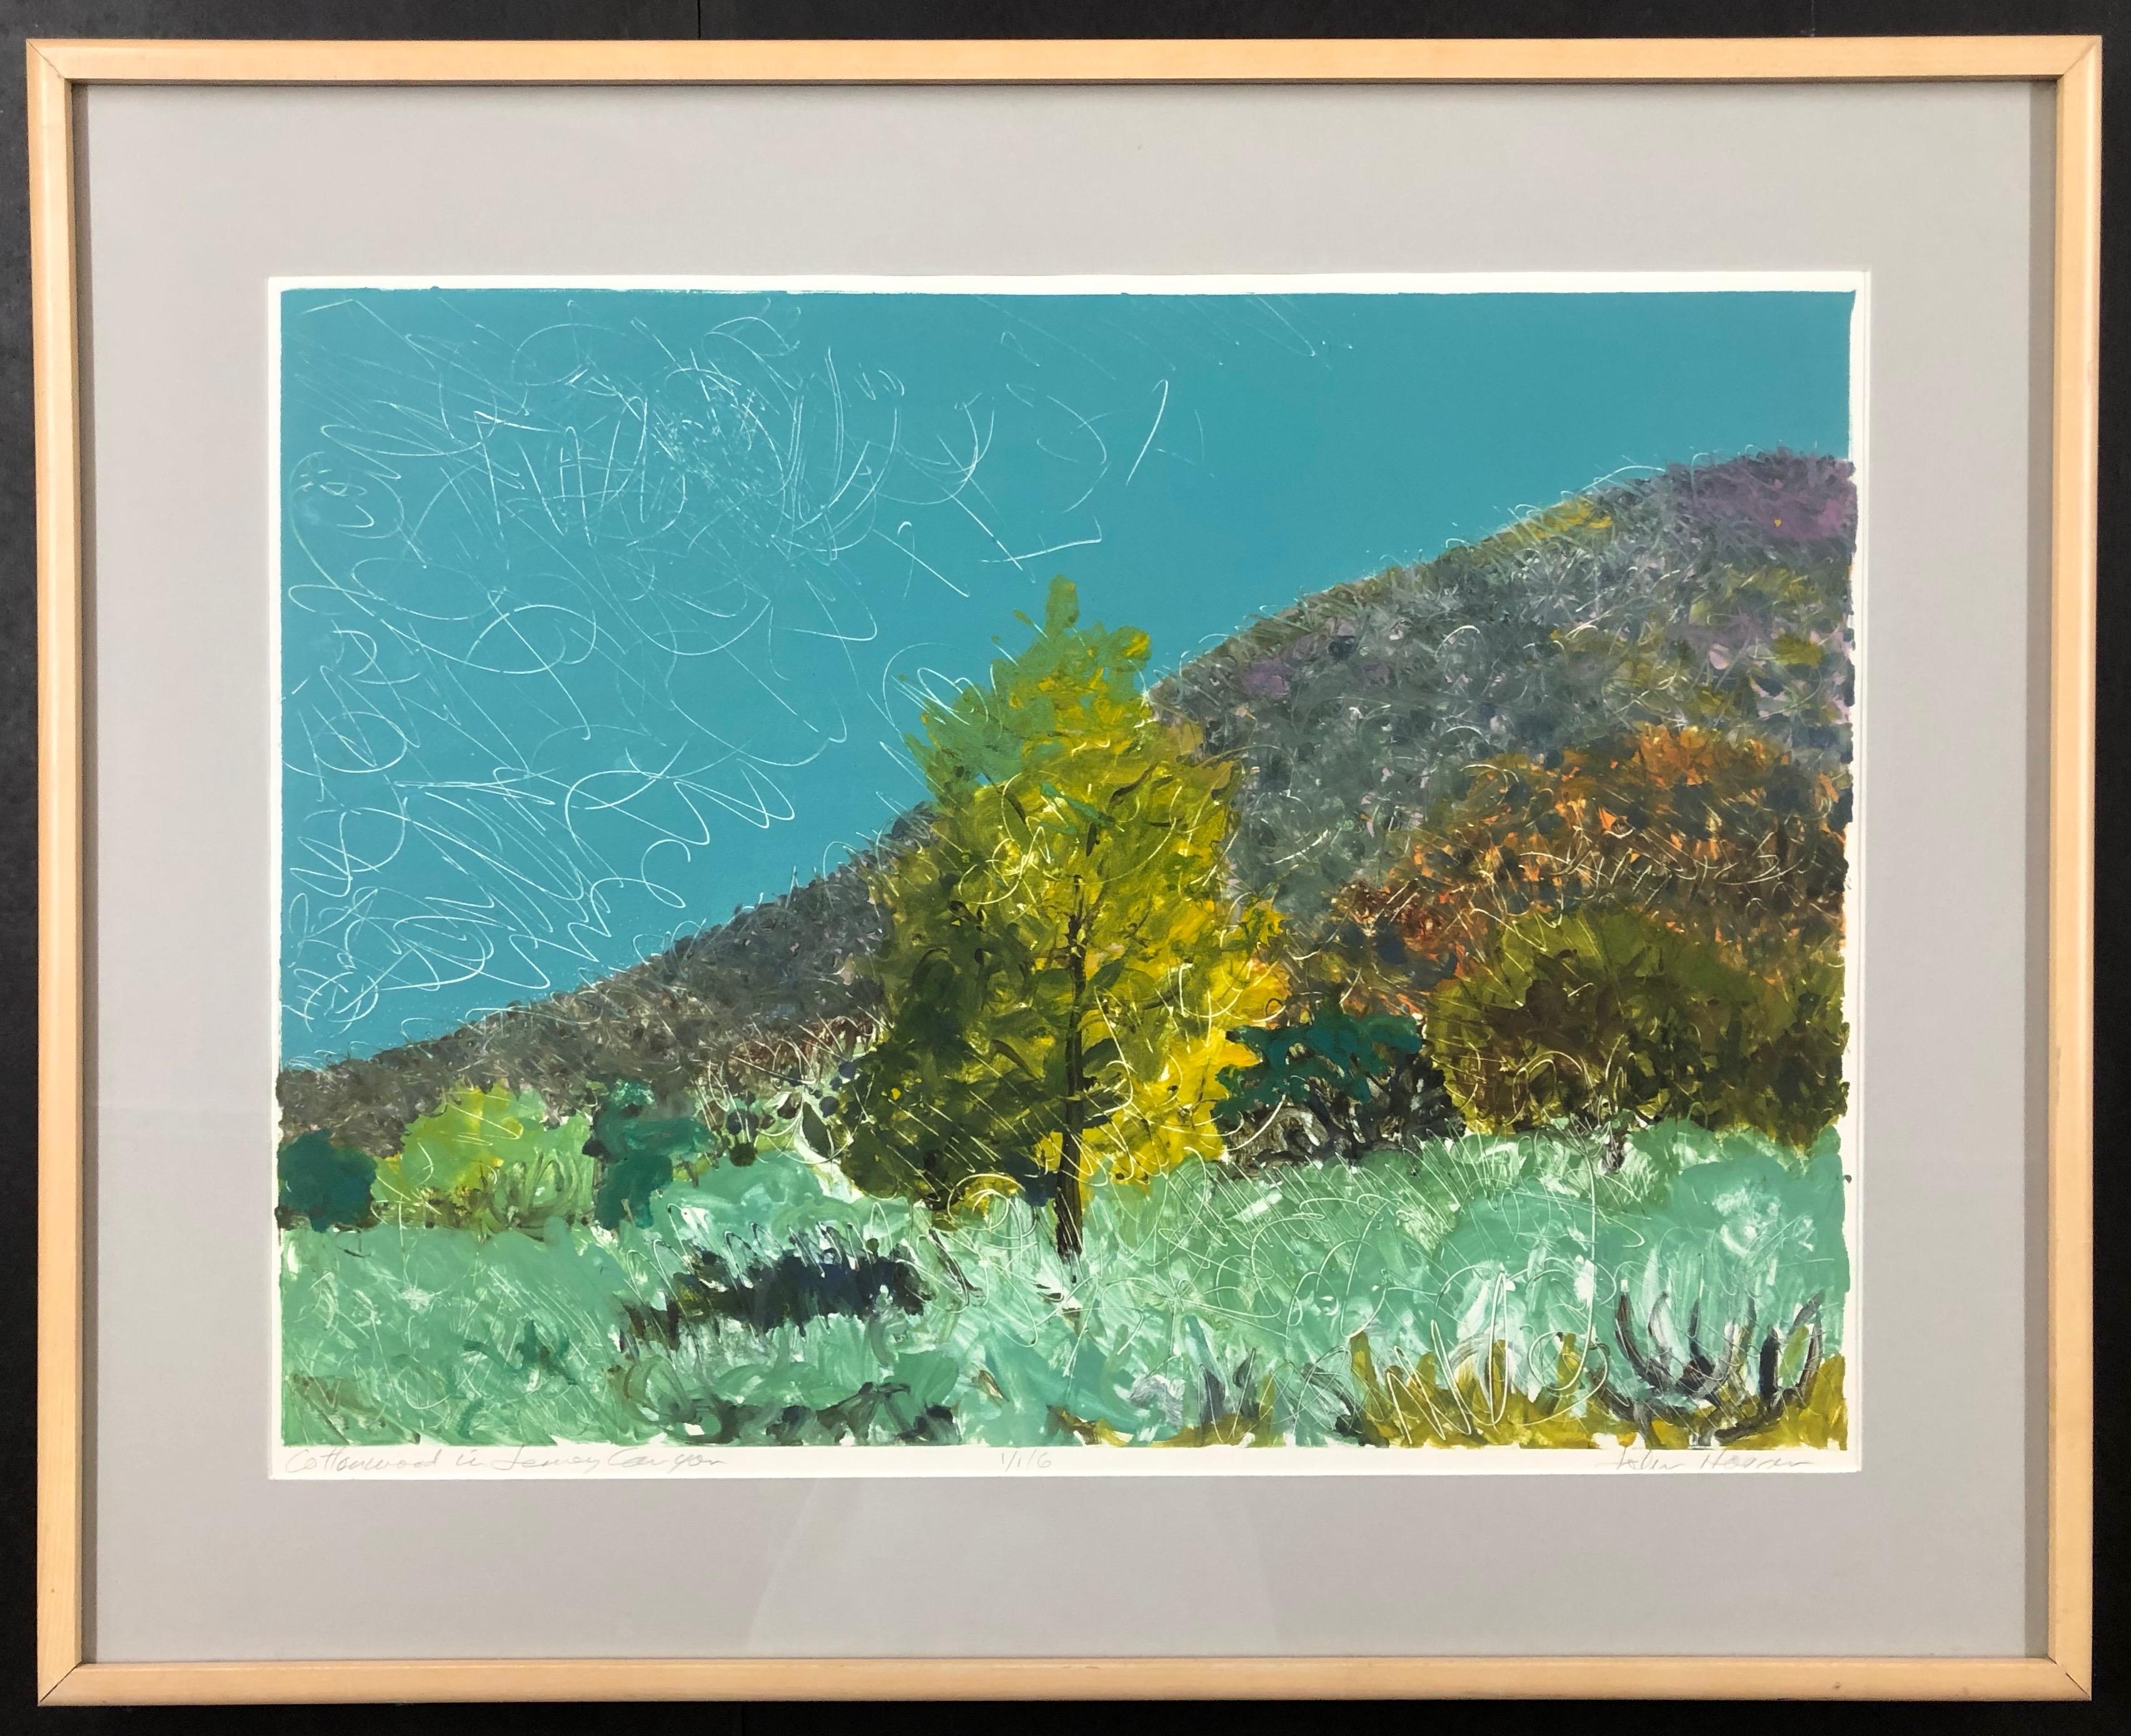 Cottonwoods in Jemez Canyon mono print by John Hogan New Mexico landscape green
framed

John Hogan A graduate of Northeast Louisiana State University with a bachelor's degree and New Mexico Highlands University with a Masters in Art Hogan studied